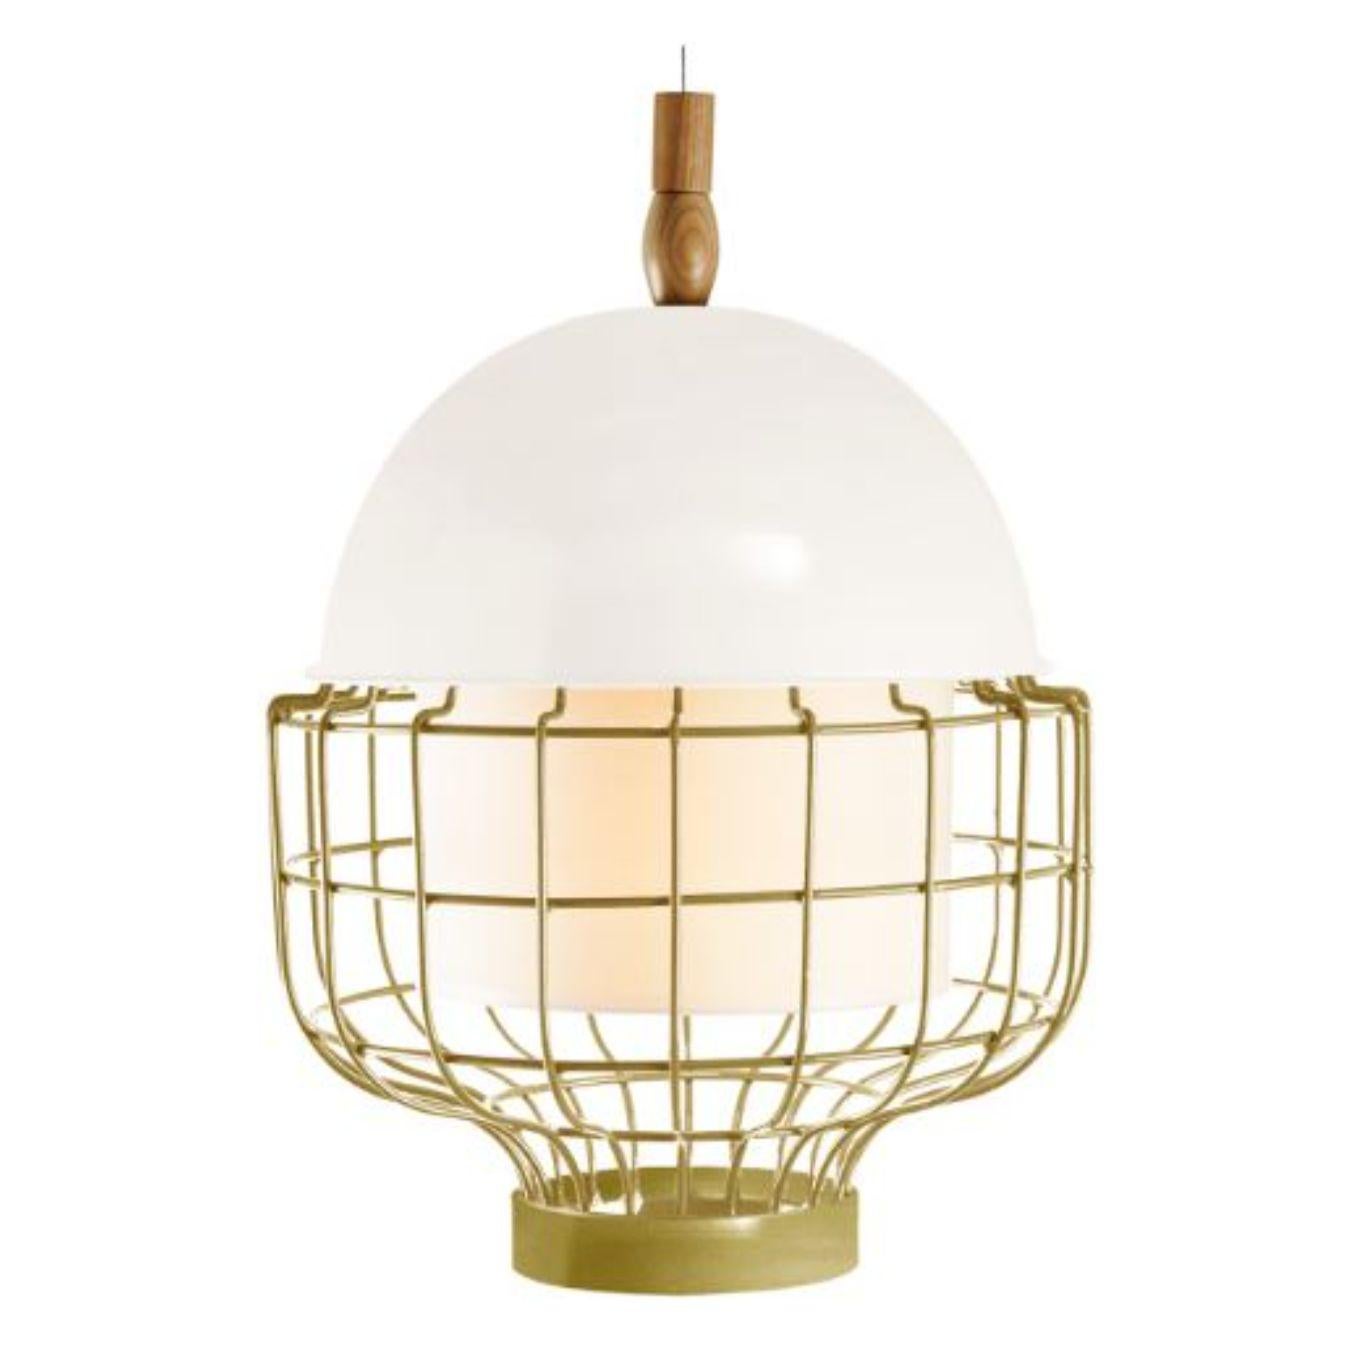 Ivory Magnolia III suspension lamp by Dooq
Dimensions: W 31 x D 31 x H 42 cm
Materials: lacquered metal, polished or brushed metal.
abat-jour: cotton
Also available in different colors and materials. 

Information:
230V/50Hz
E27/1x15W